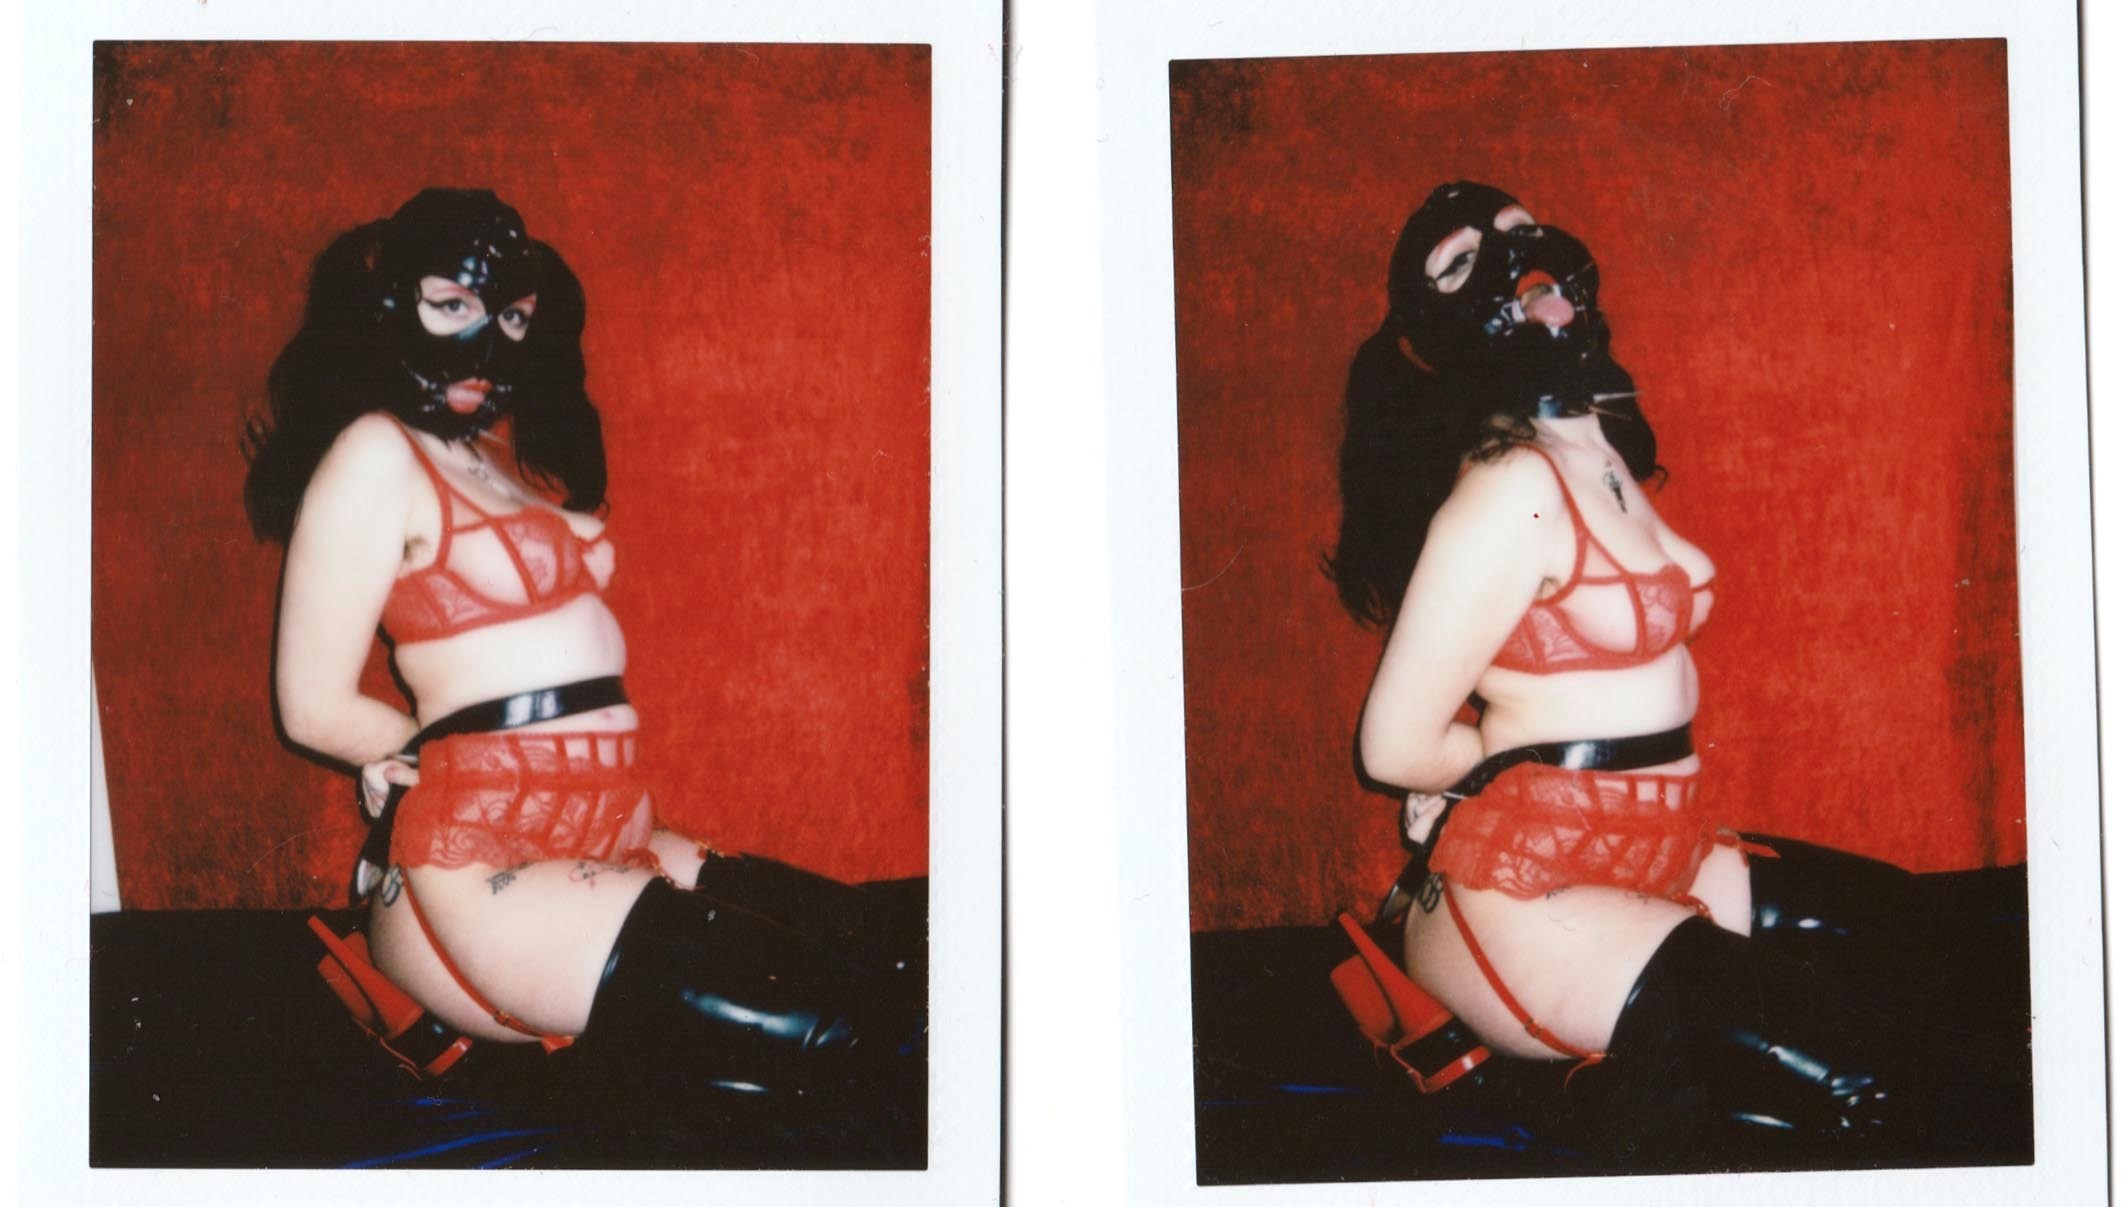 The photographers redefining the erotic image for the 21st century Dazed pic